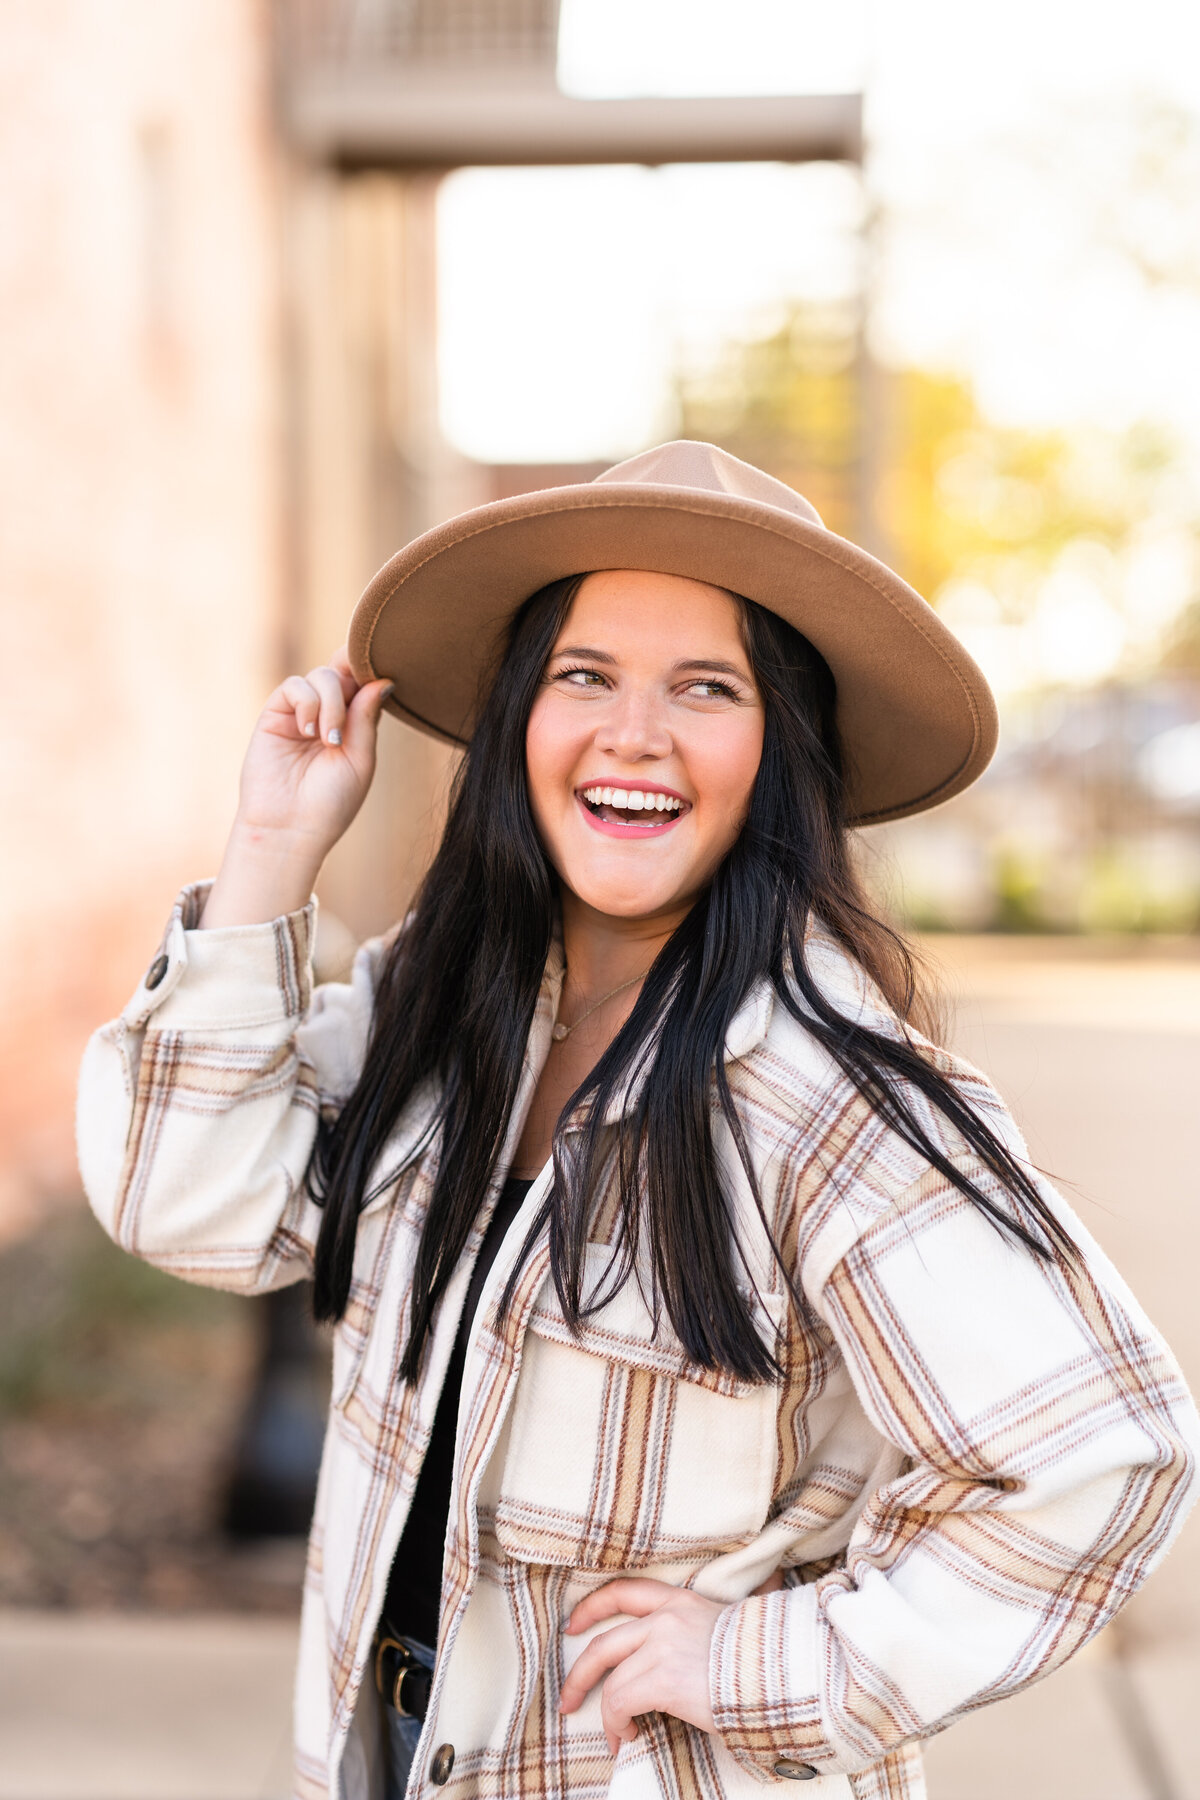 Girl wearing fall plaid and cute hat with hands on hip and hat while laughing off camera